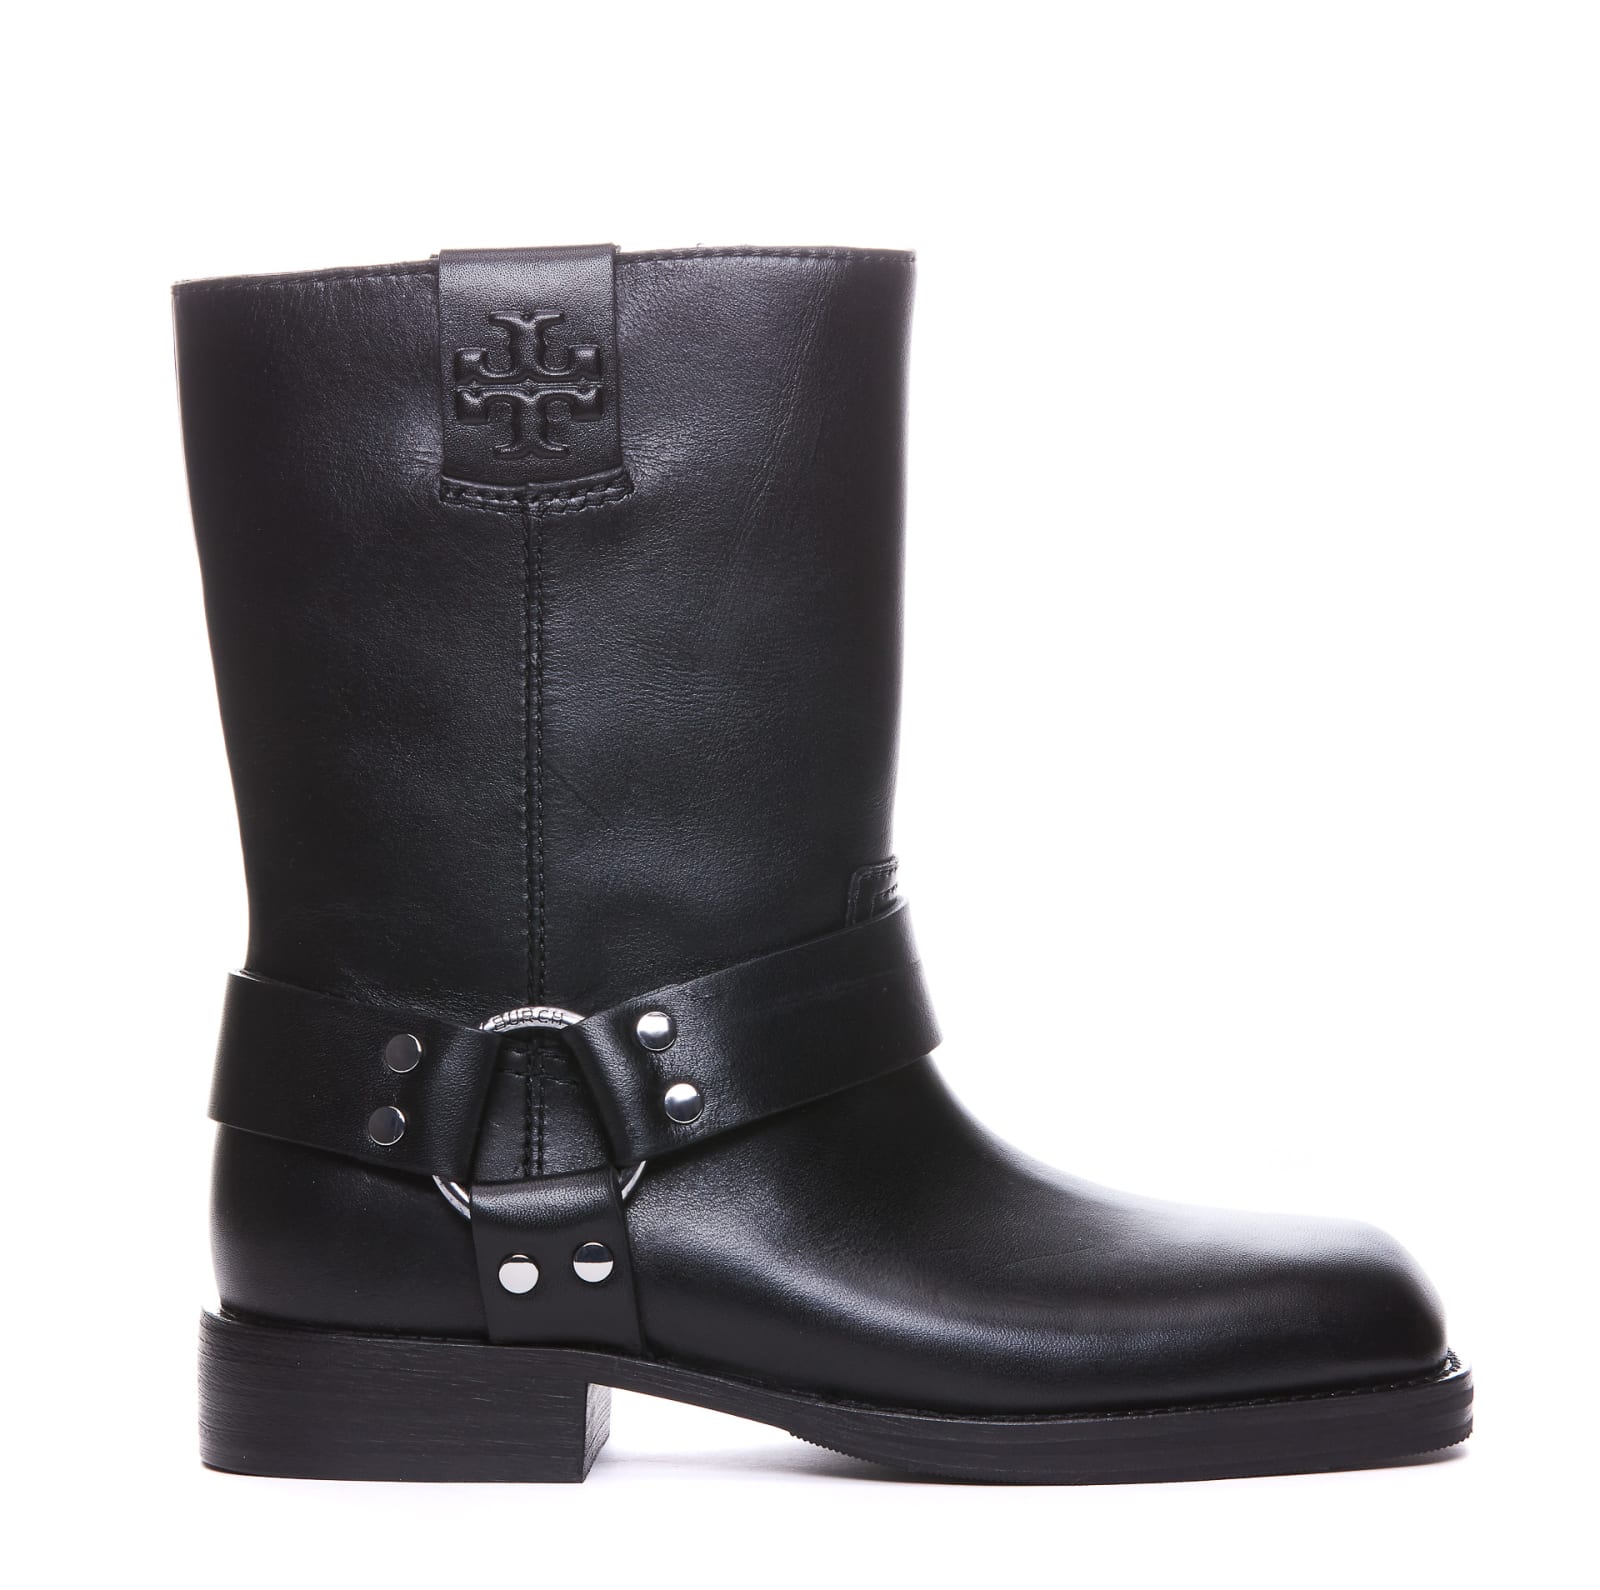 moto Black Leather Boots